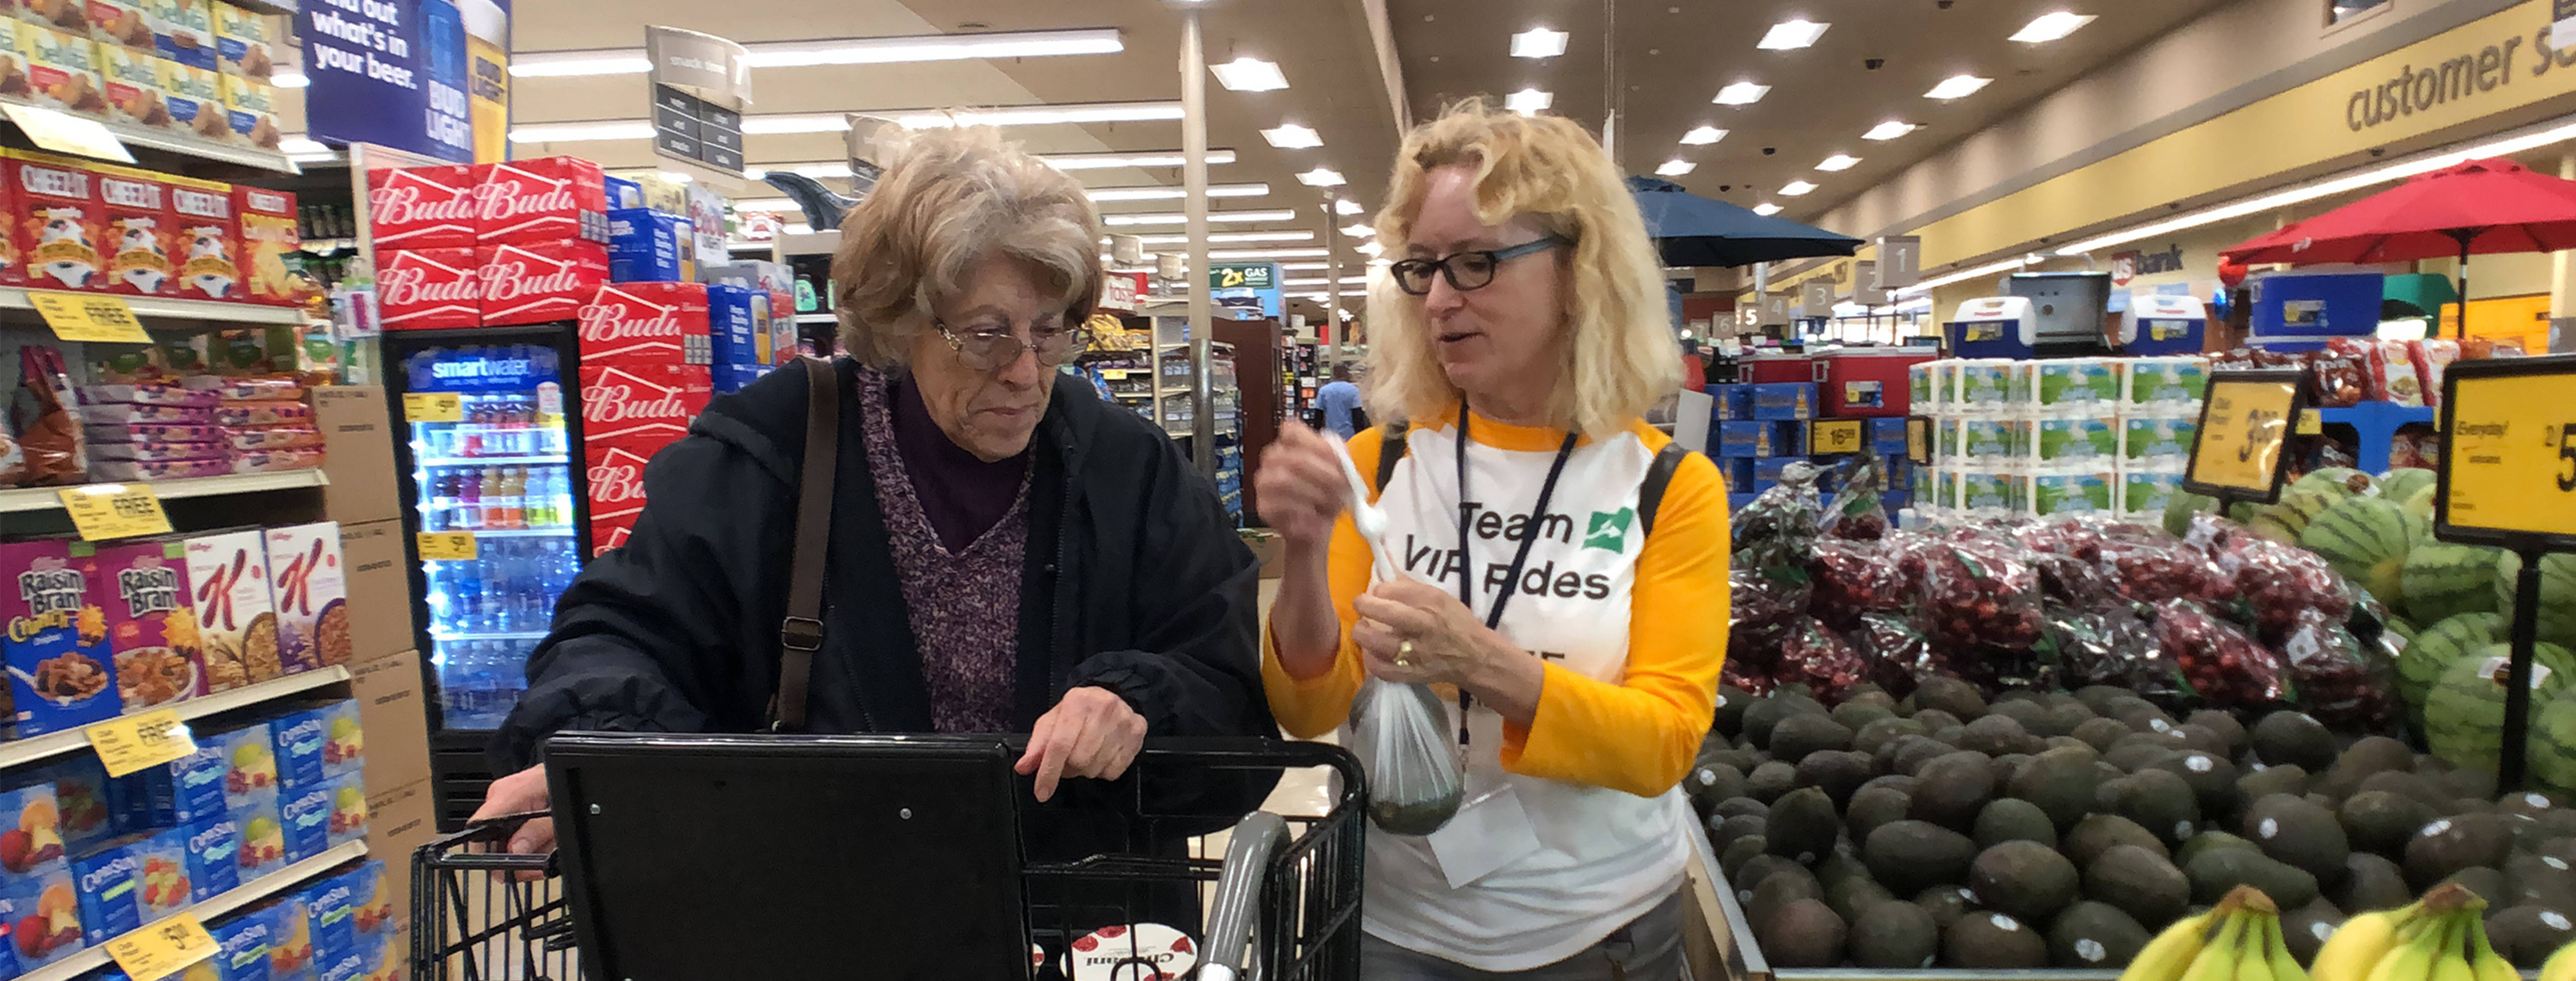 two women face the camera in the middle of a grocery store. both are light-skinned; the one on the left has gray hair and glasses and pushes a shopping cart. the one on the right has blond hair and a bright white t-shirt with yellow baseball-style sleeves. she is holding a plastic bag with produce in it.